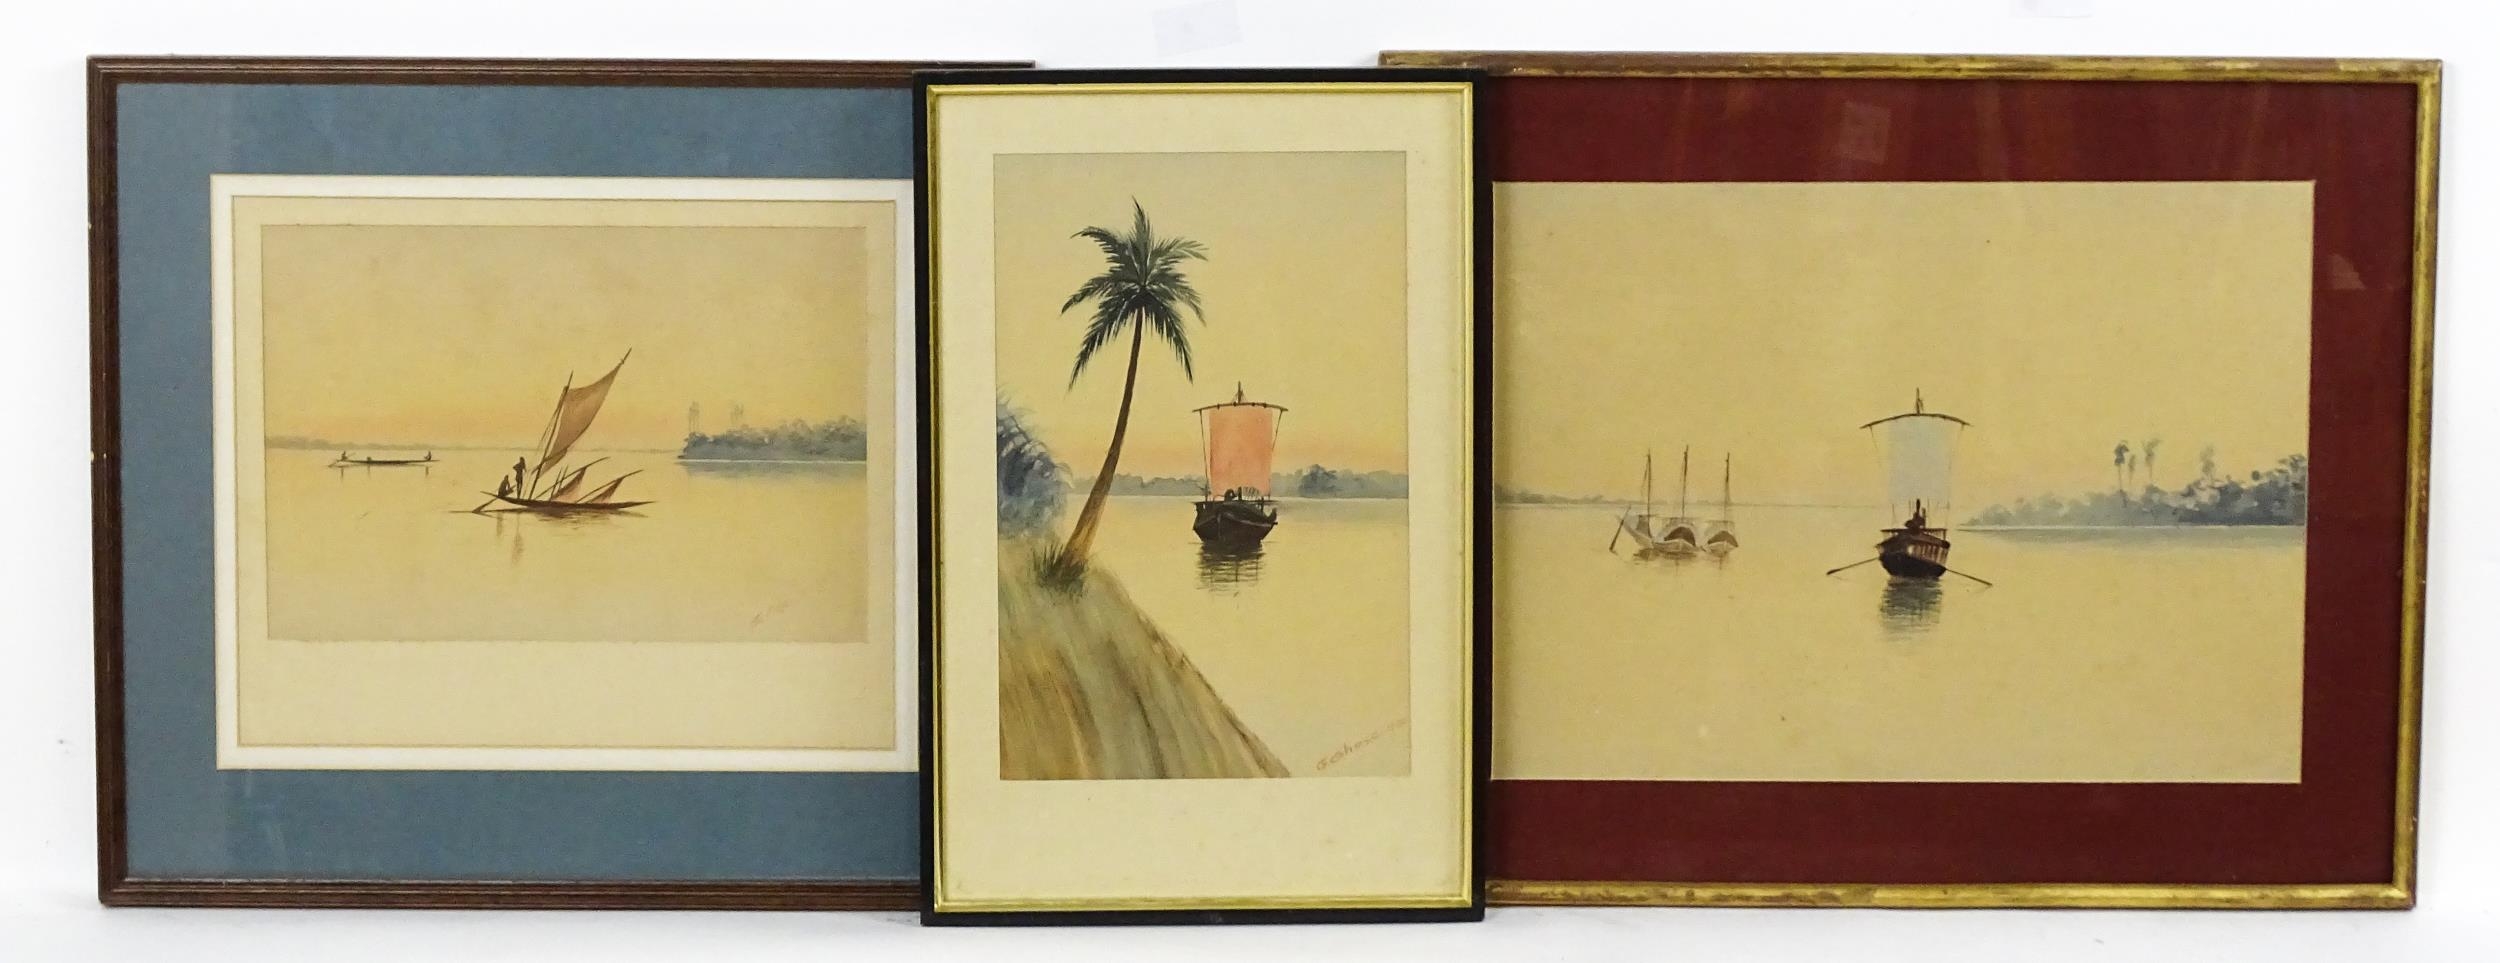 G. Ghose, Early 20th century, Indian School, Watercolours, Three river scenes with fishing boats and